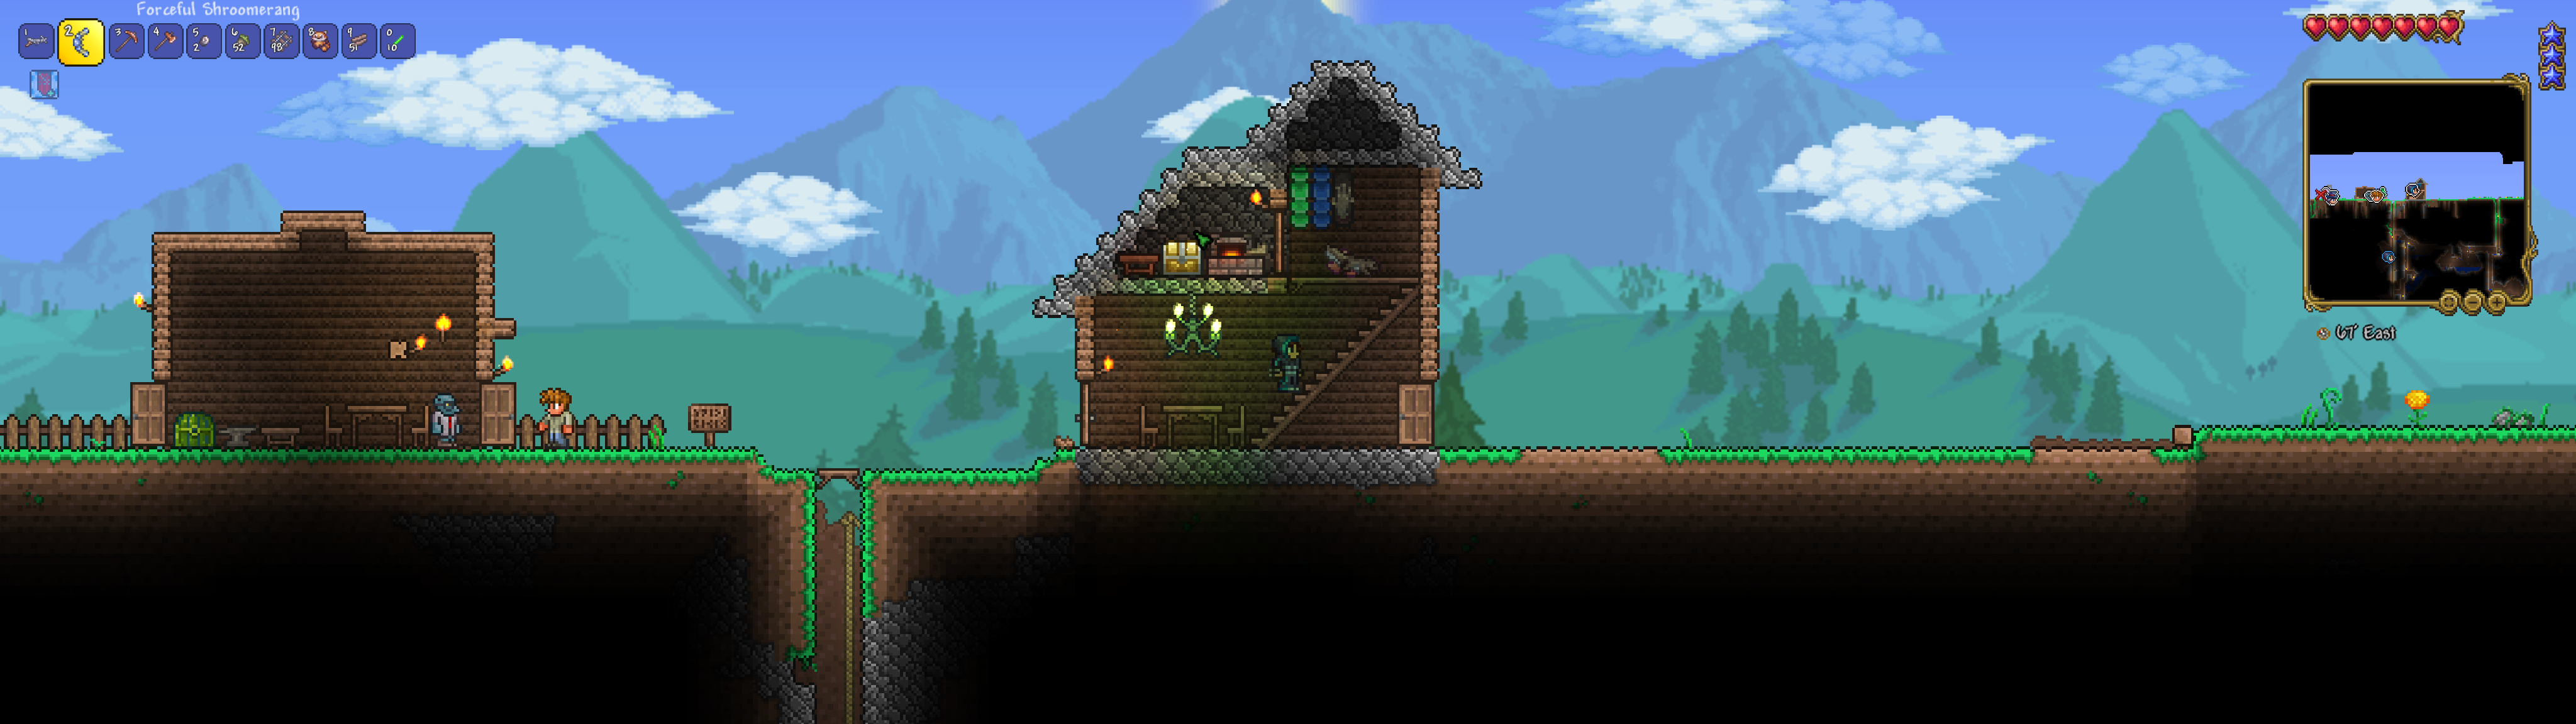 Terraria_ Now with more ducks! 9_30_2023 2_23_54 PM.png